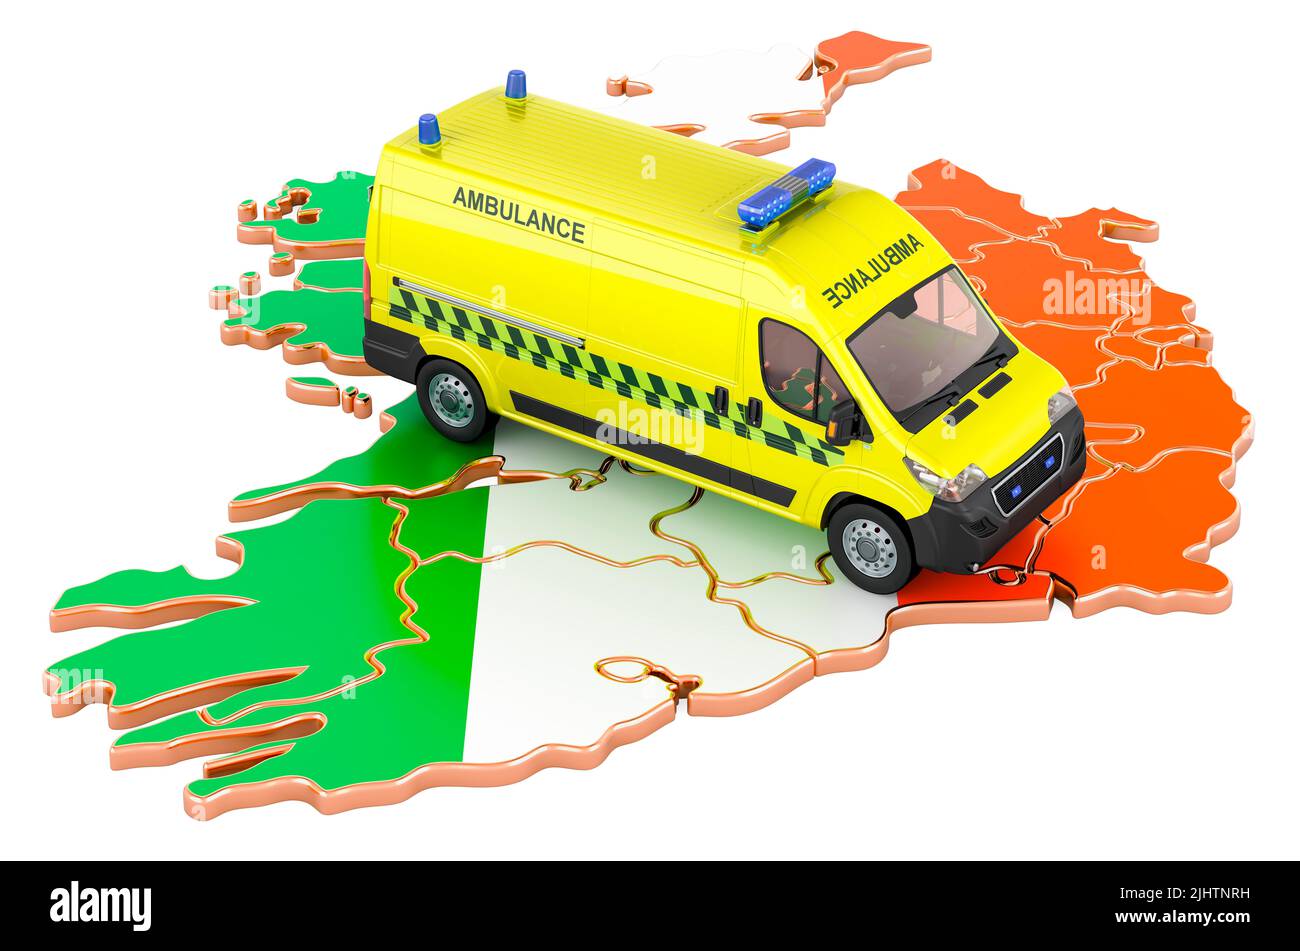 Emergency medical services in Ireland. Ambulance van on the Irish map. 3D rendering isolated on white background Stock Photo